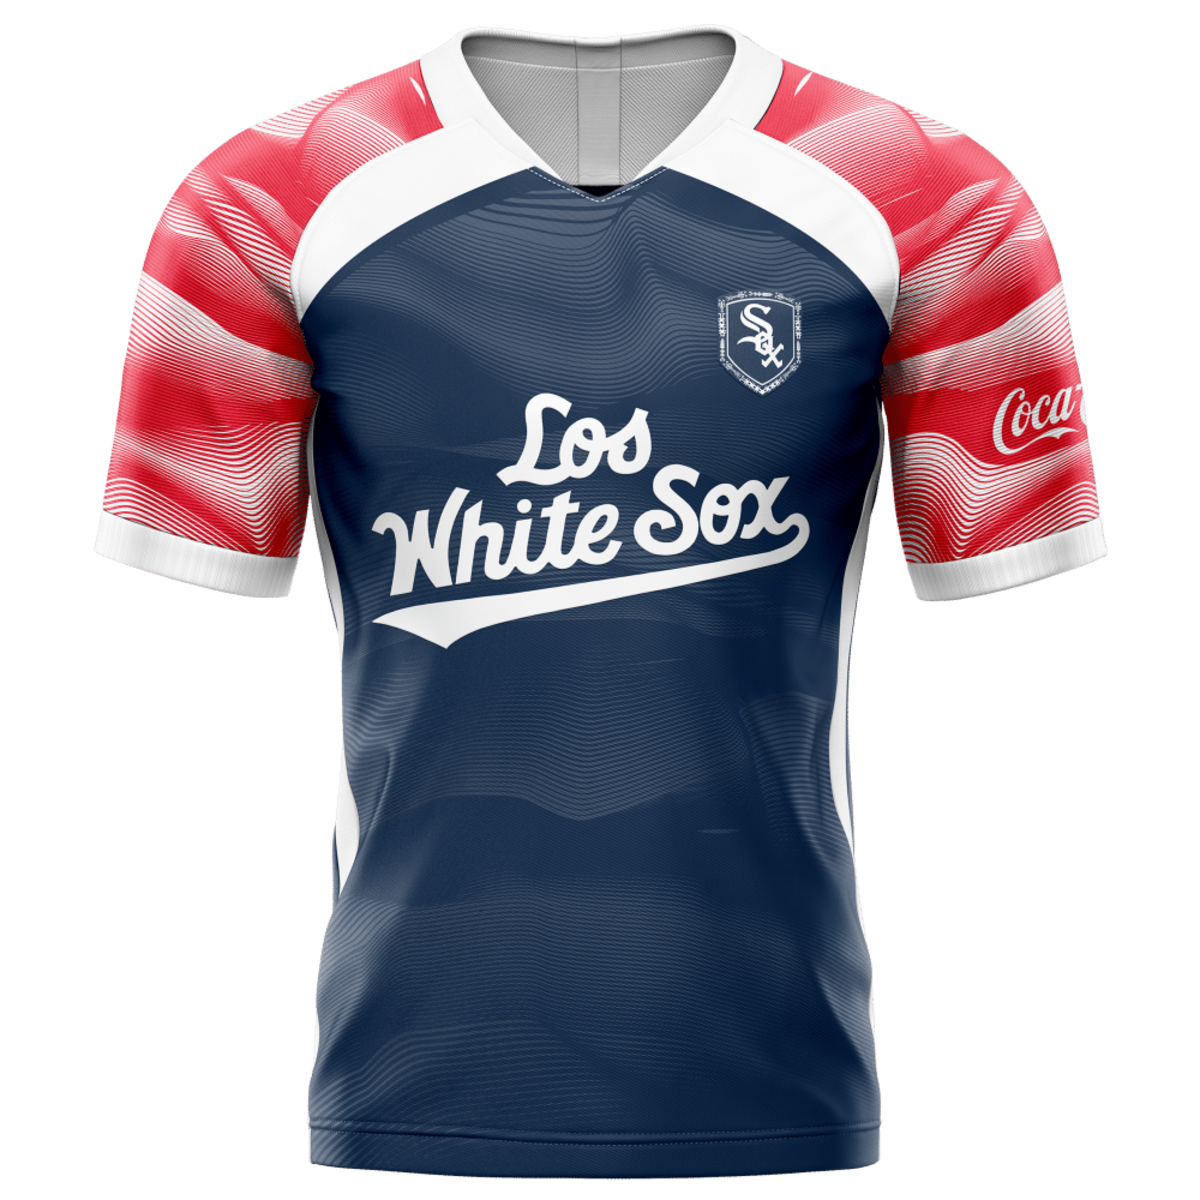 Los White Sox Soccer Jersey 2022